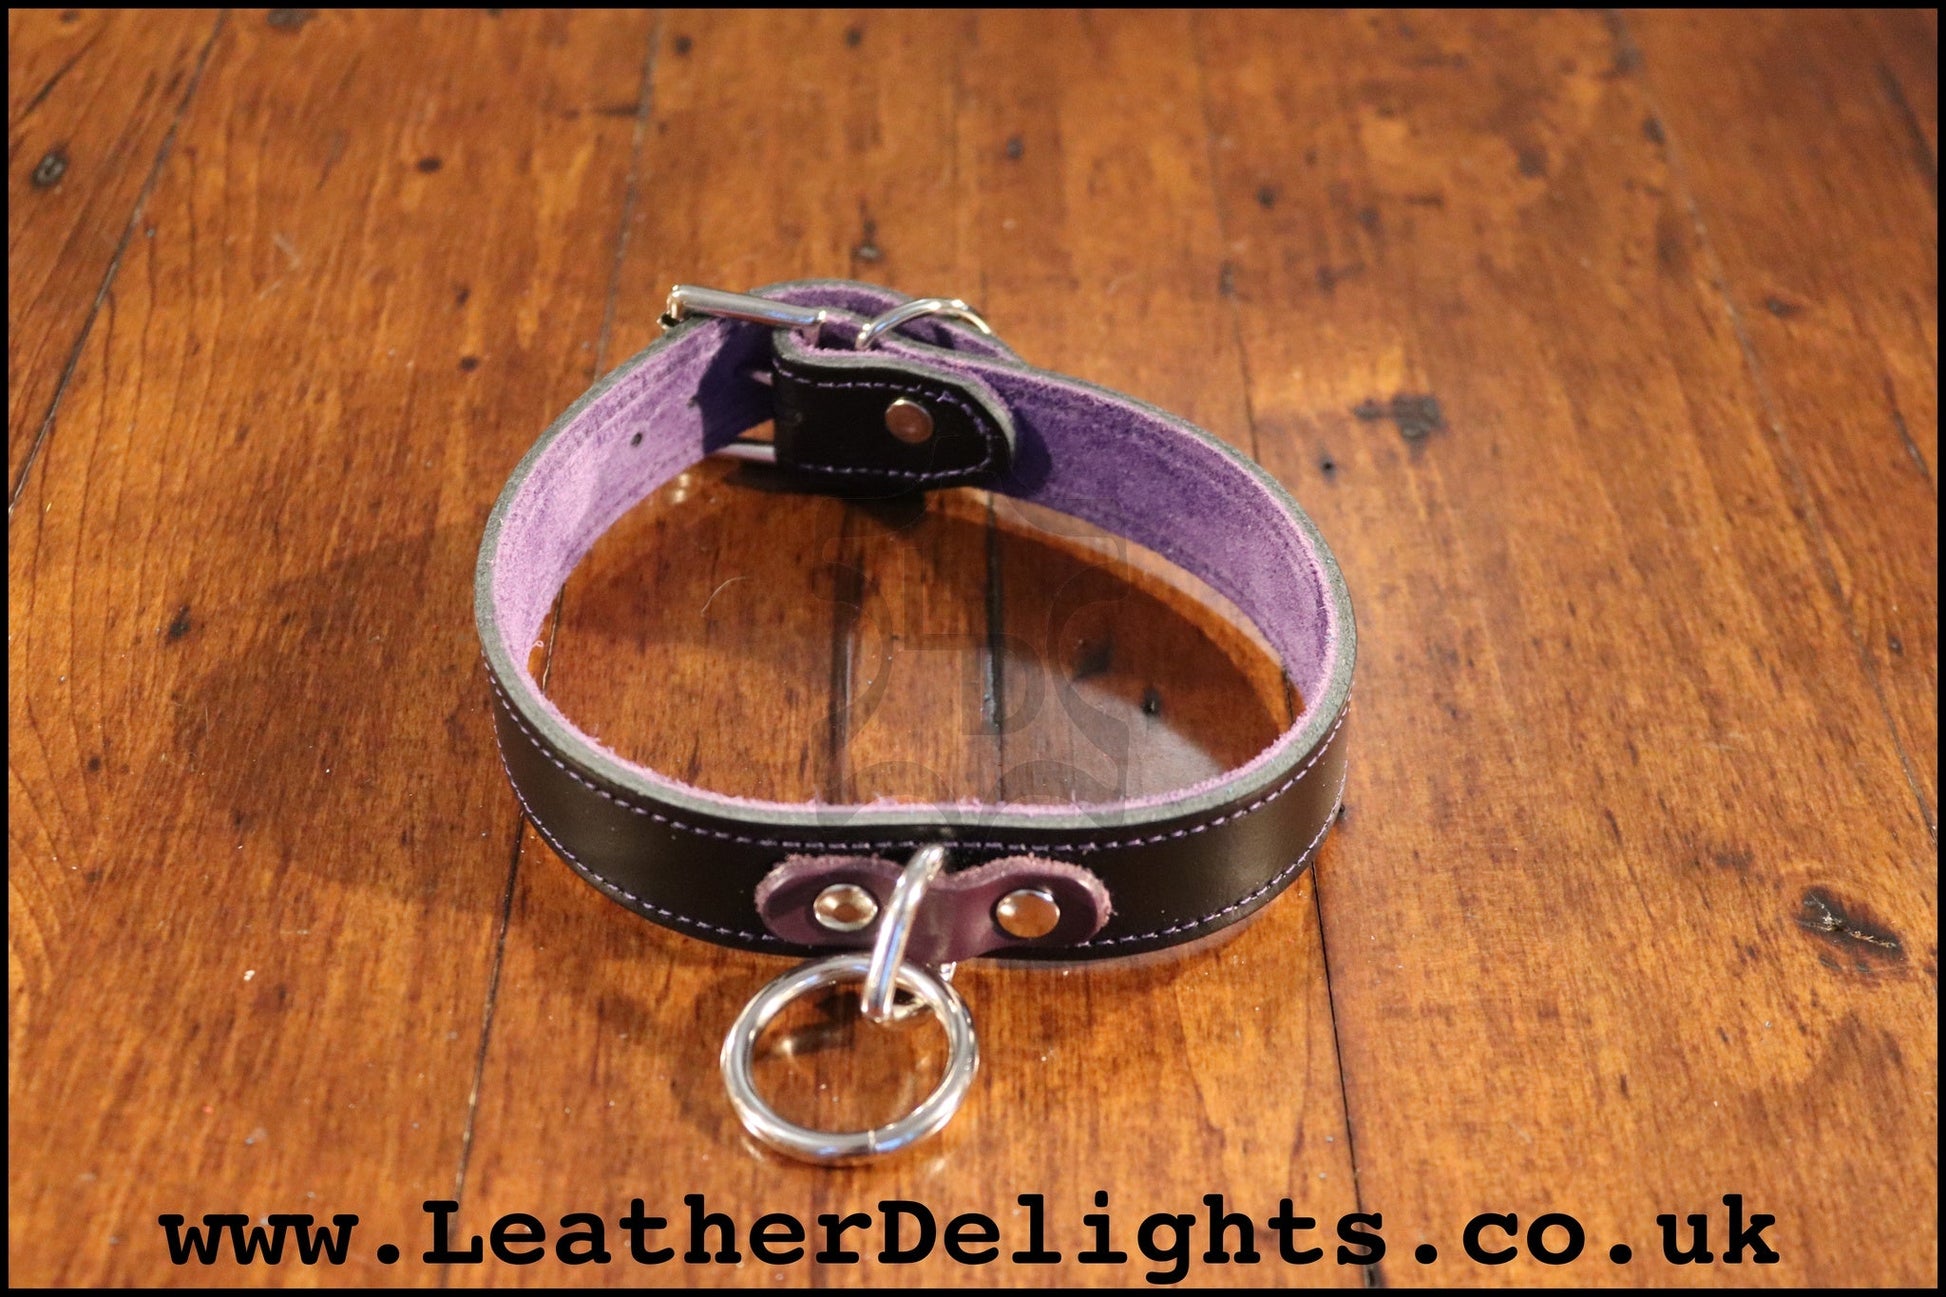 1" Wide Collar with Welded O Ring - Leather Delights